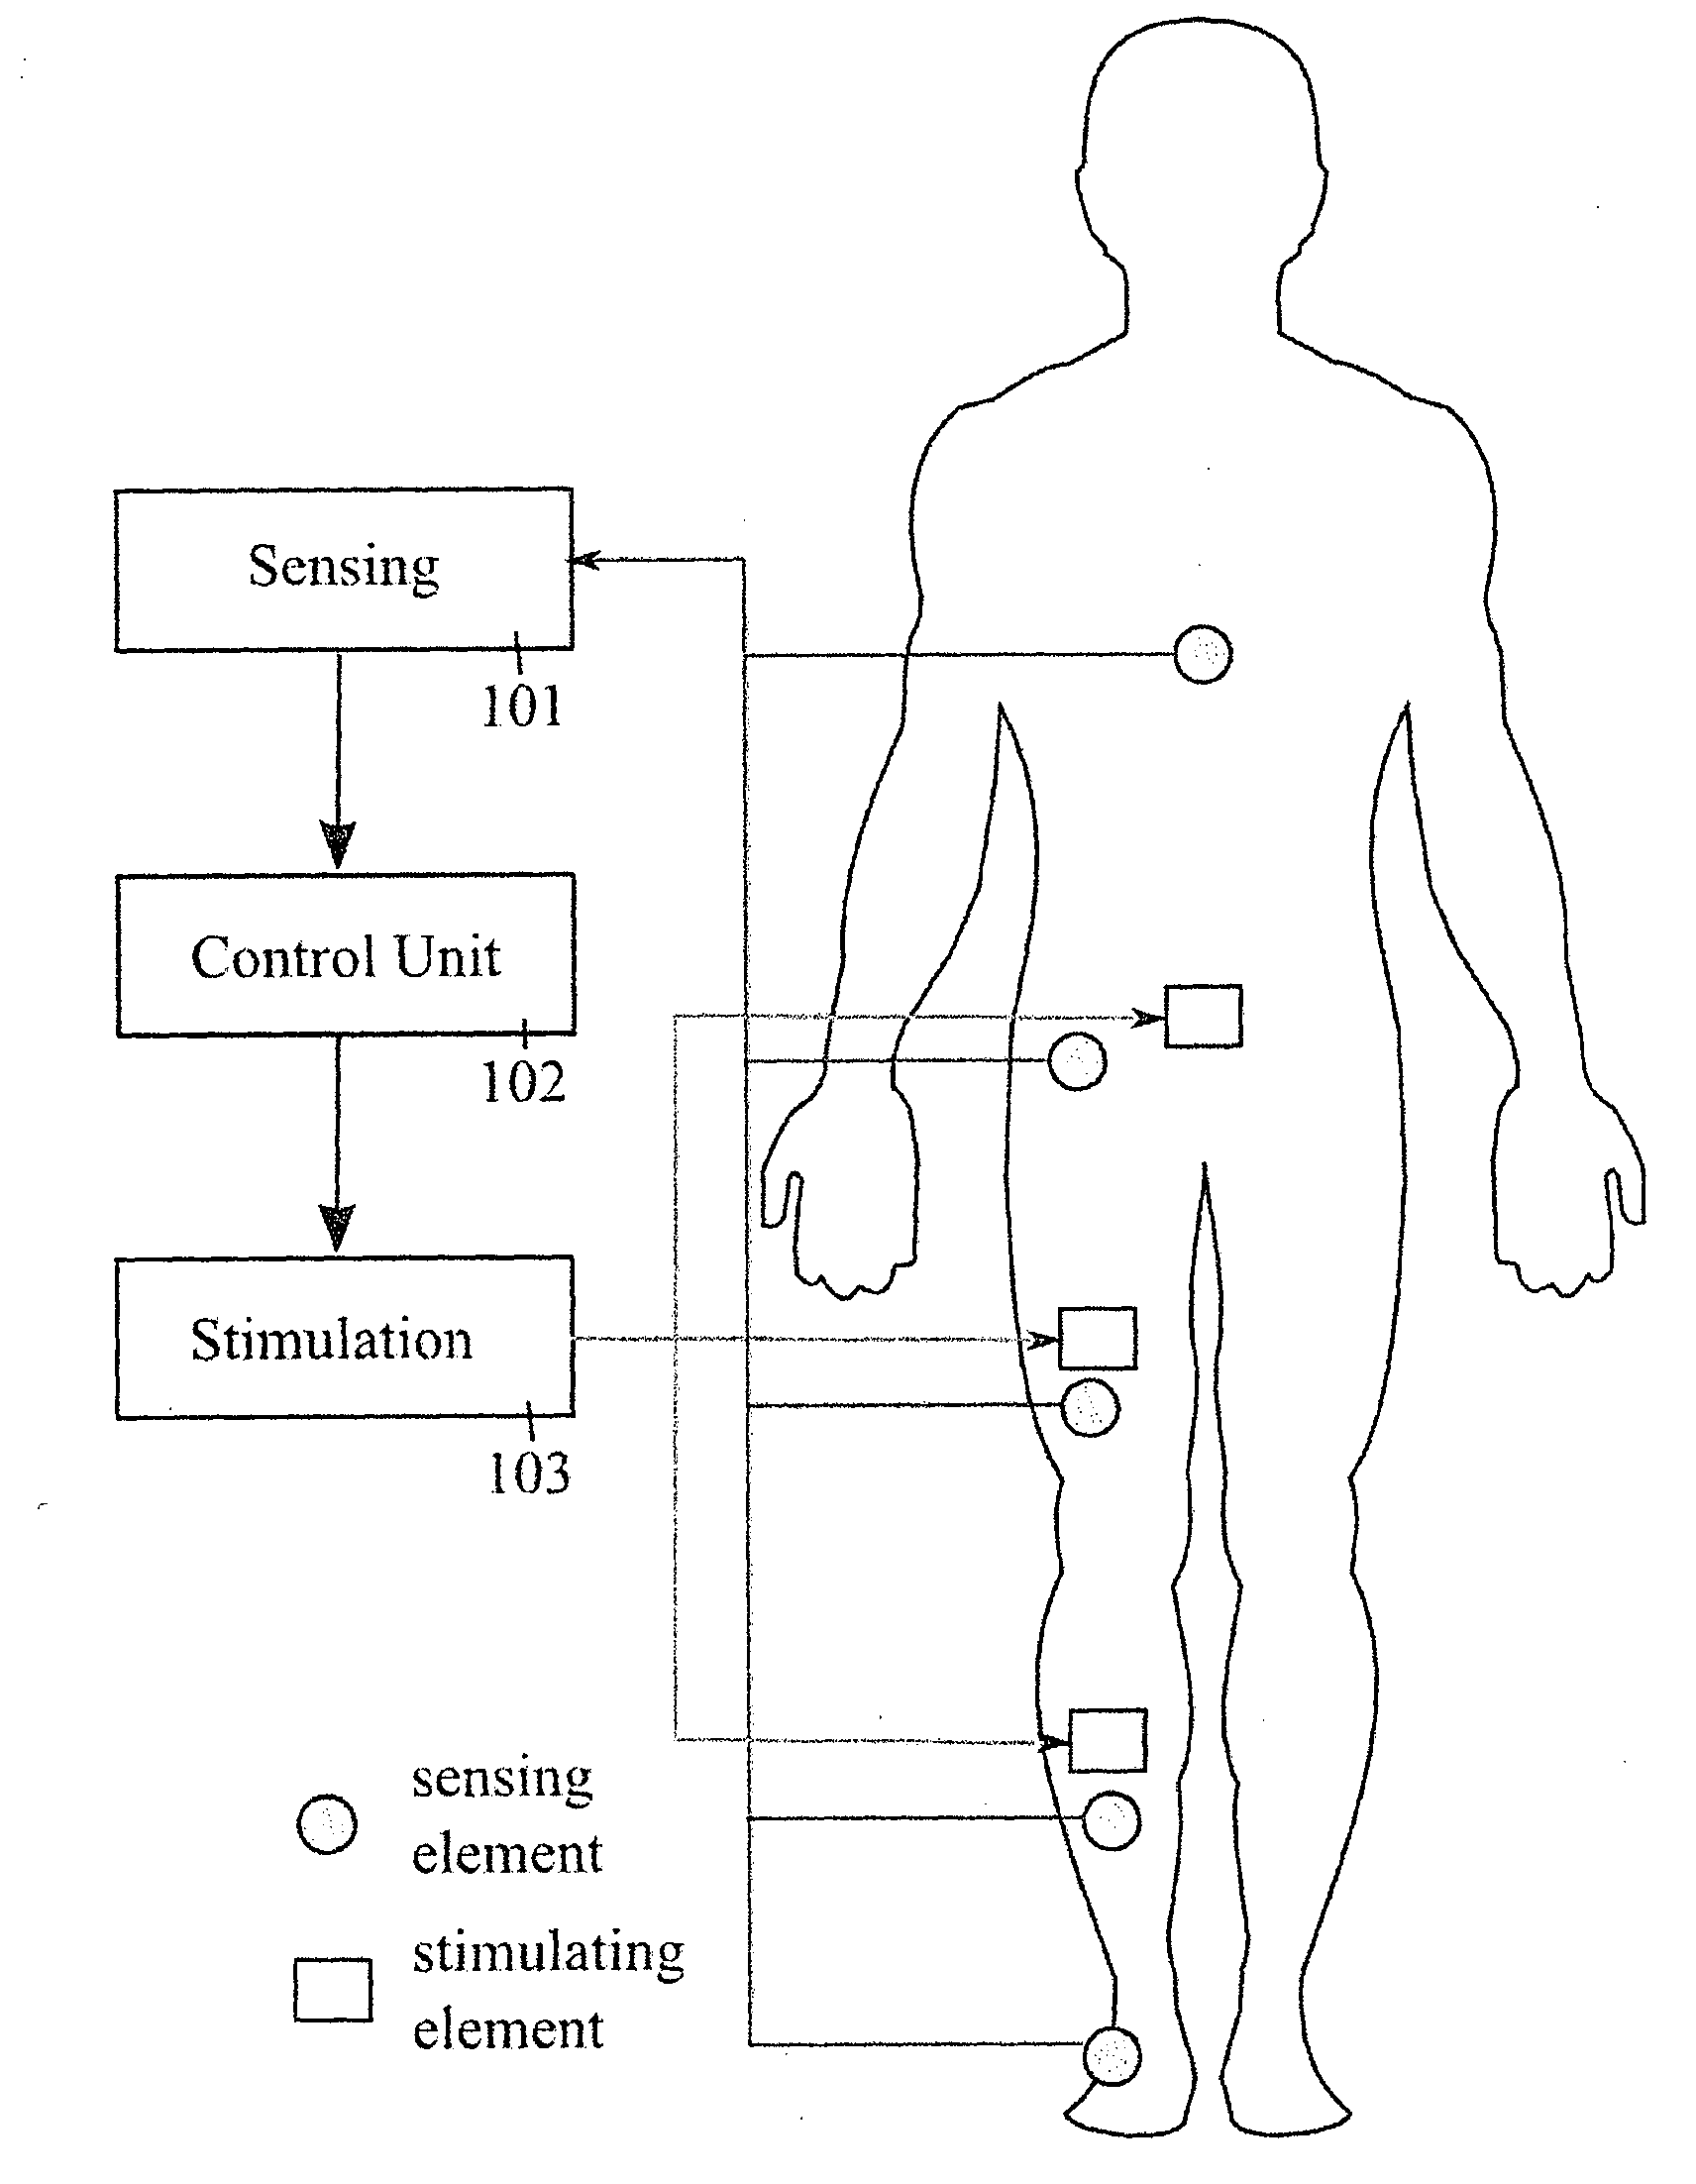 Apparatus and methods for prevention of syncope